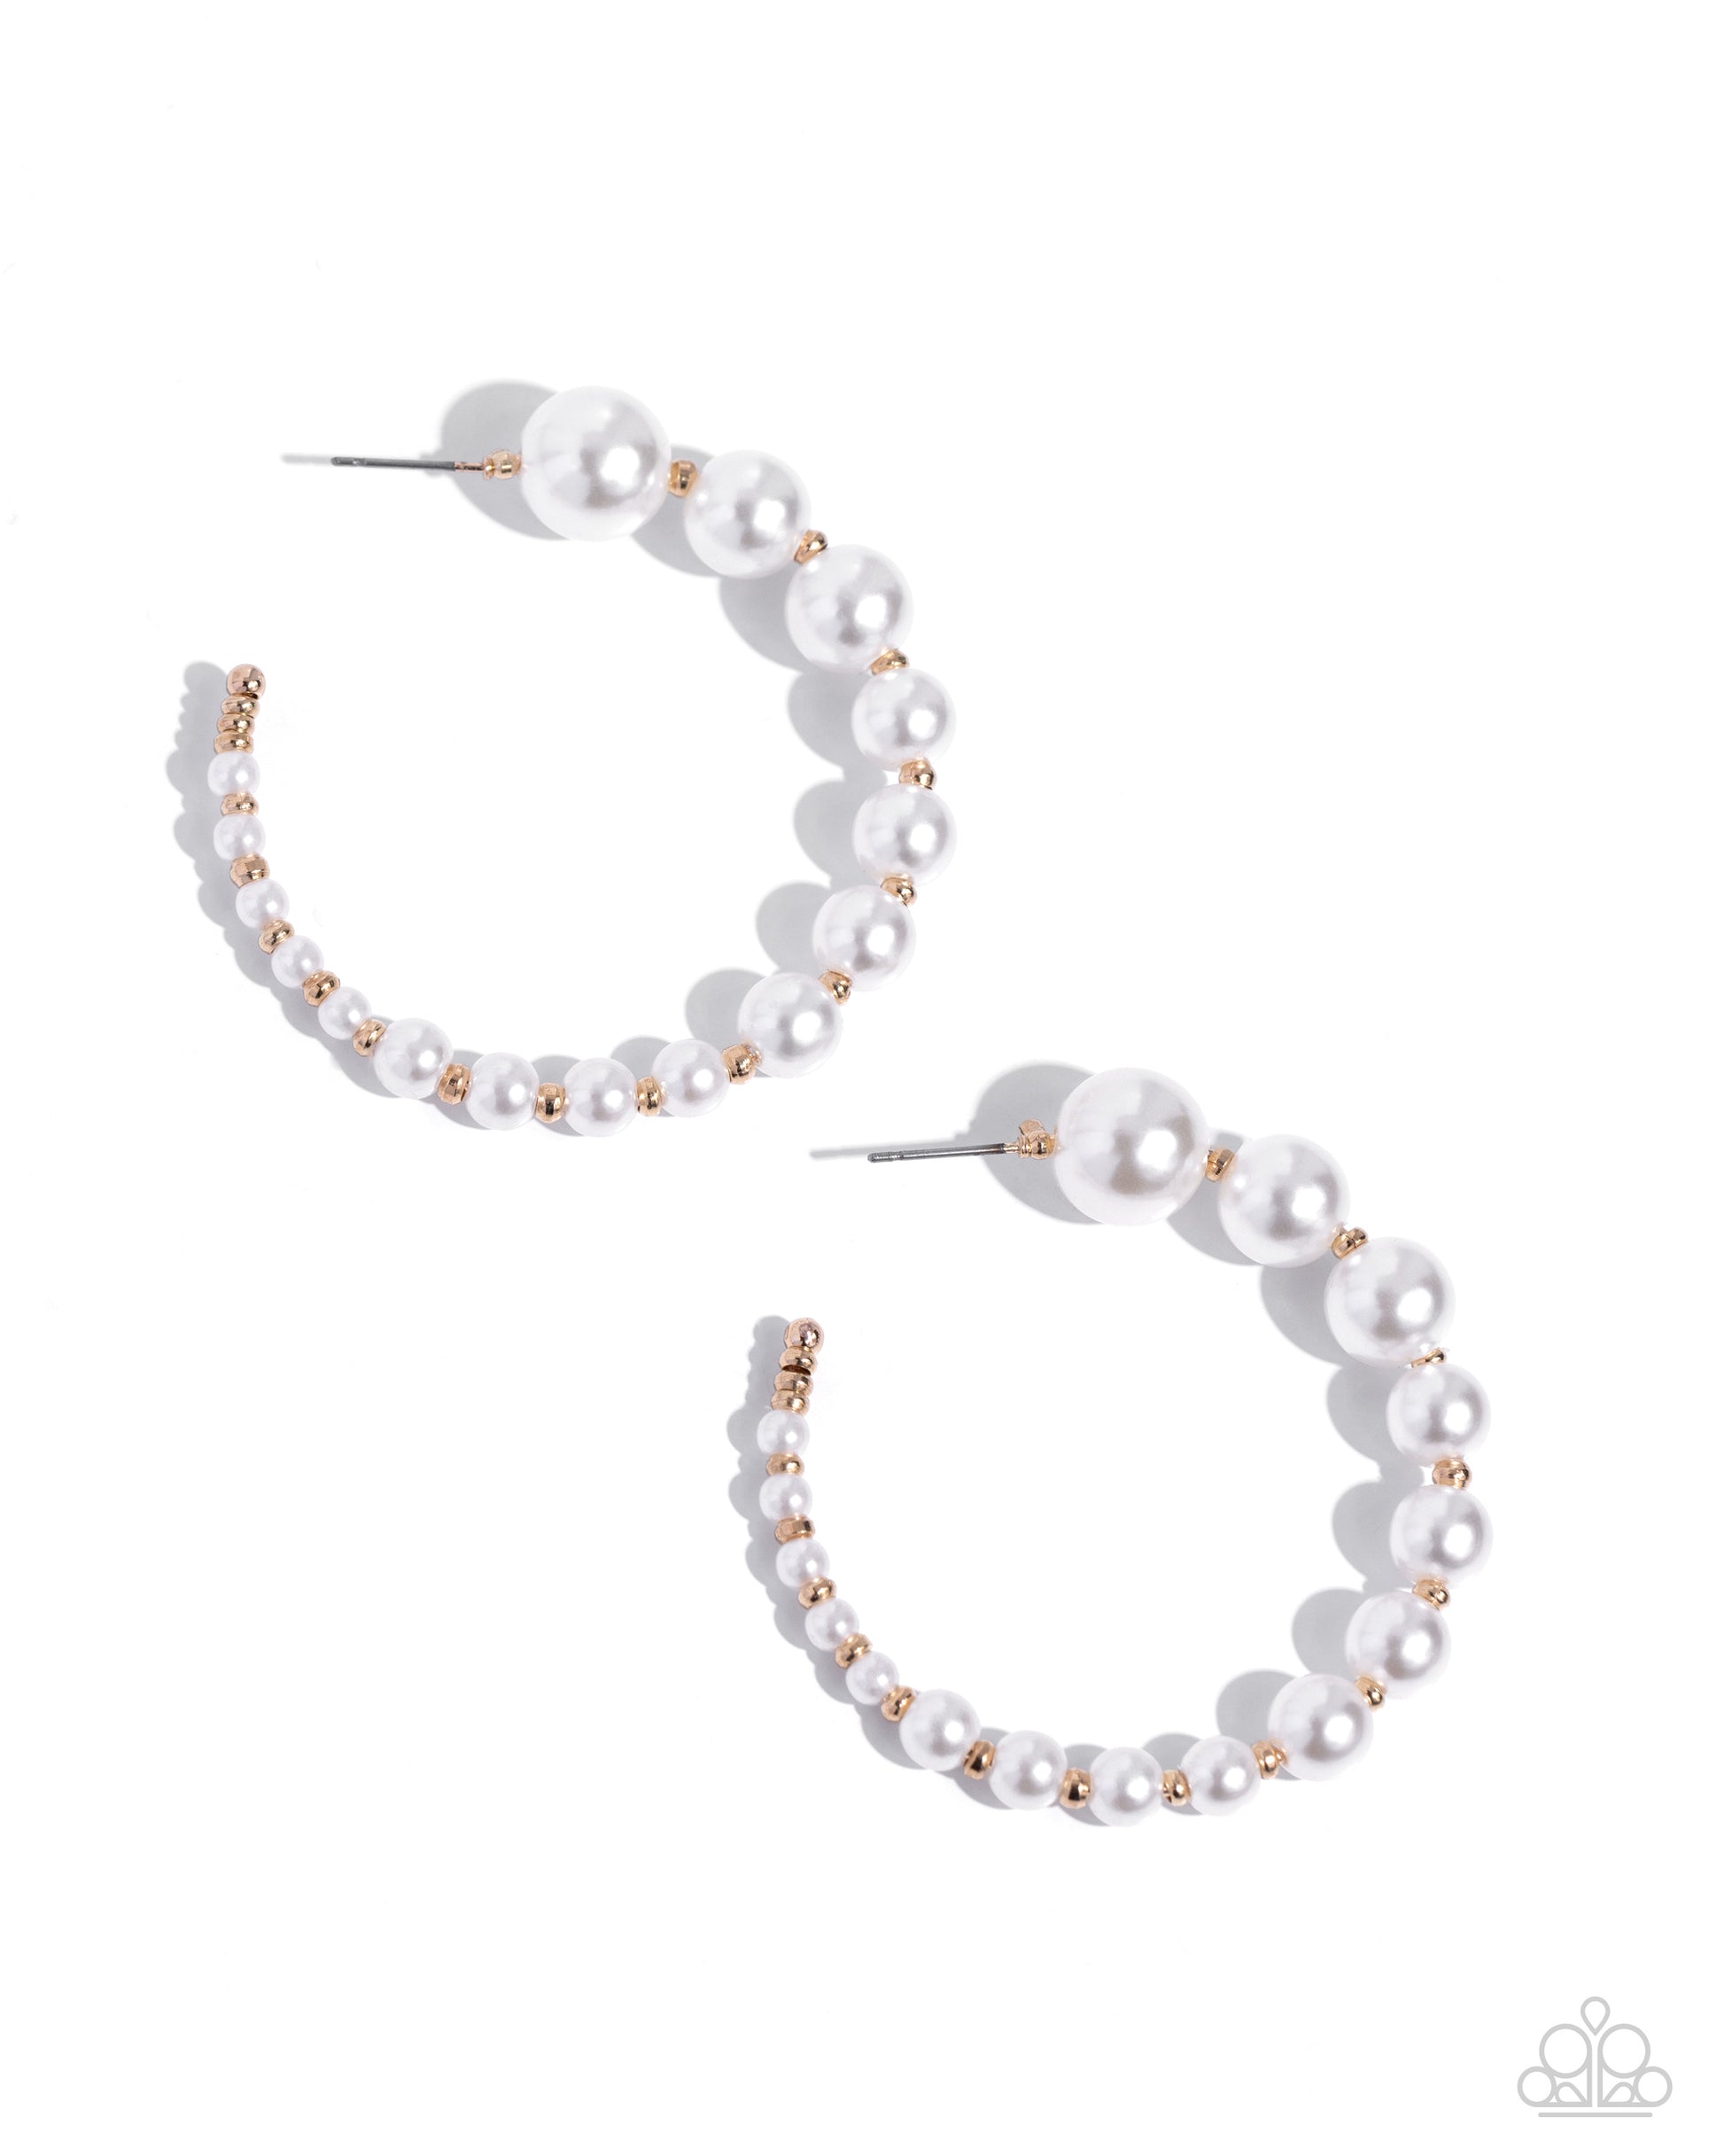 Refined hoop pearl earrings with alternating glossy white pearls and dainty gold beads, gradually decreasing in size.